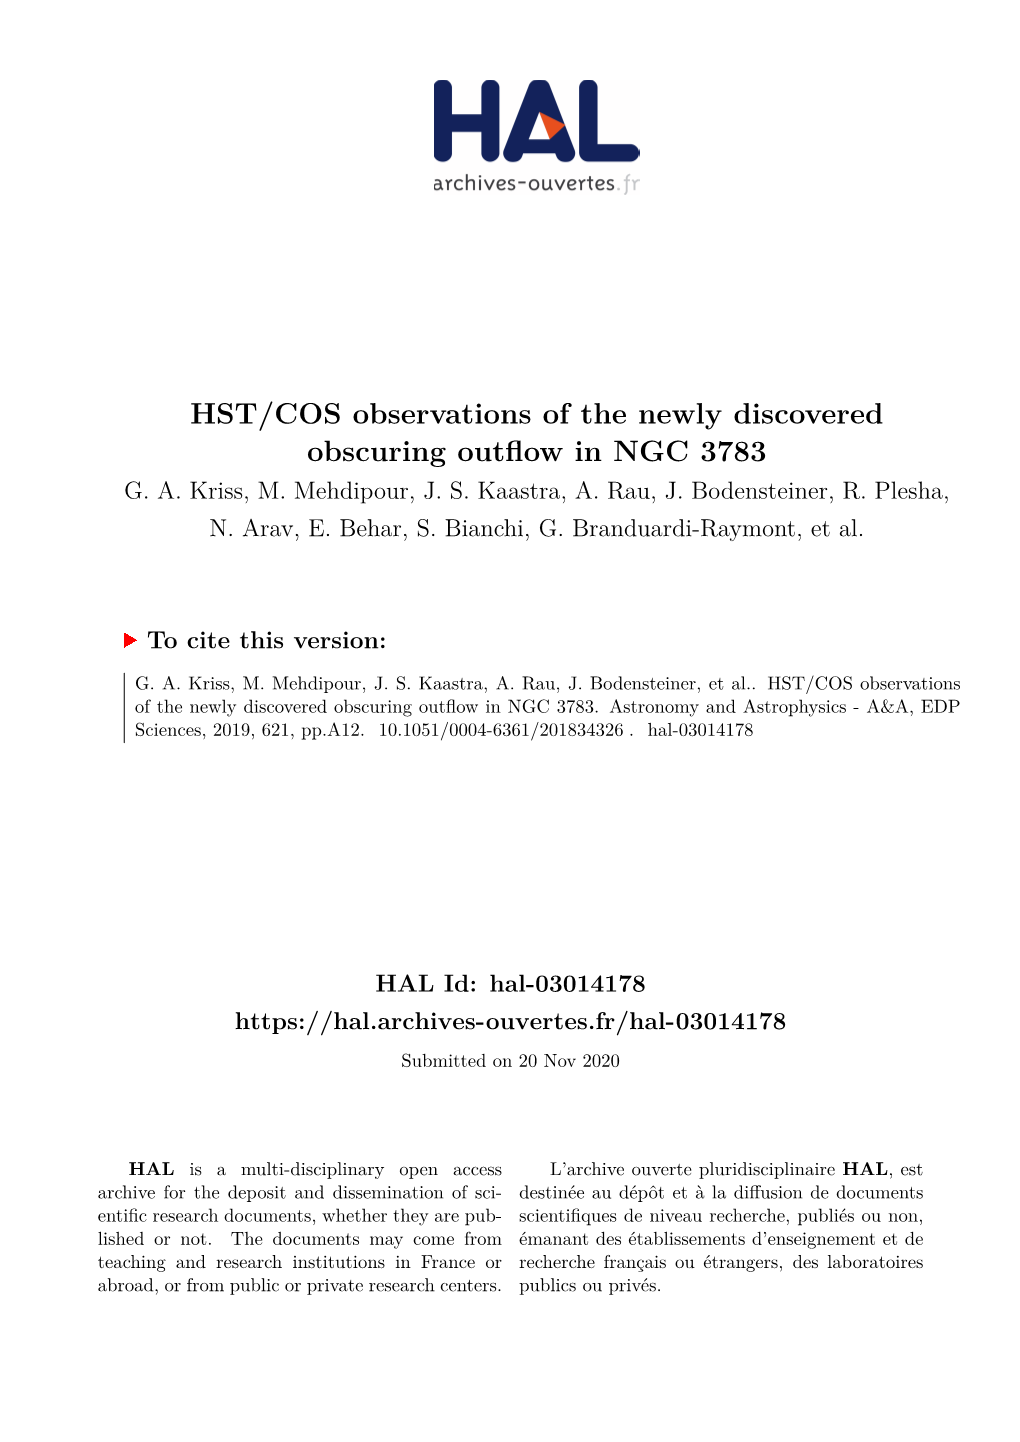 HST/COS Observations of the Newly Discovered Obscuring Outflow in NGC 3783 G